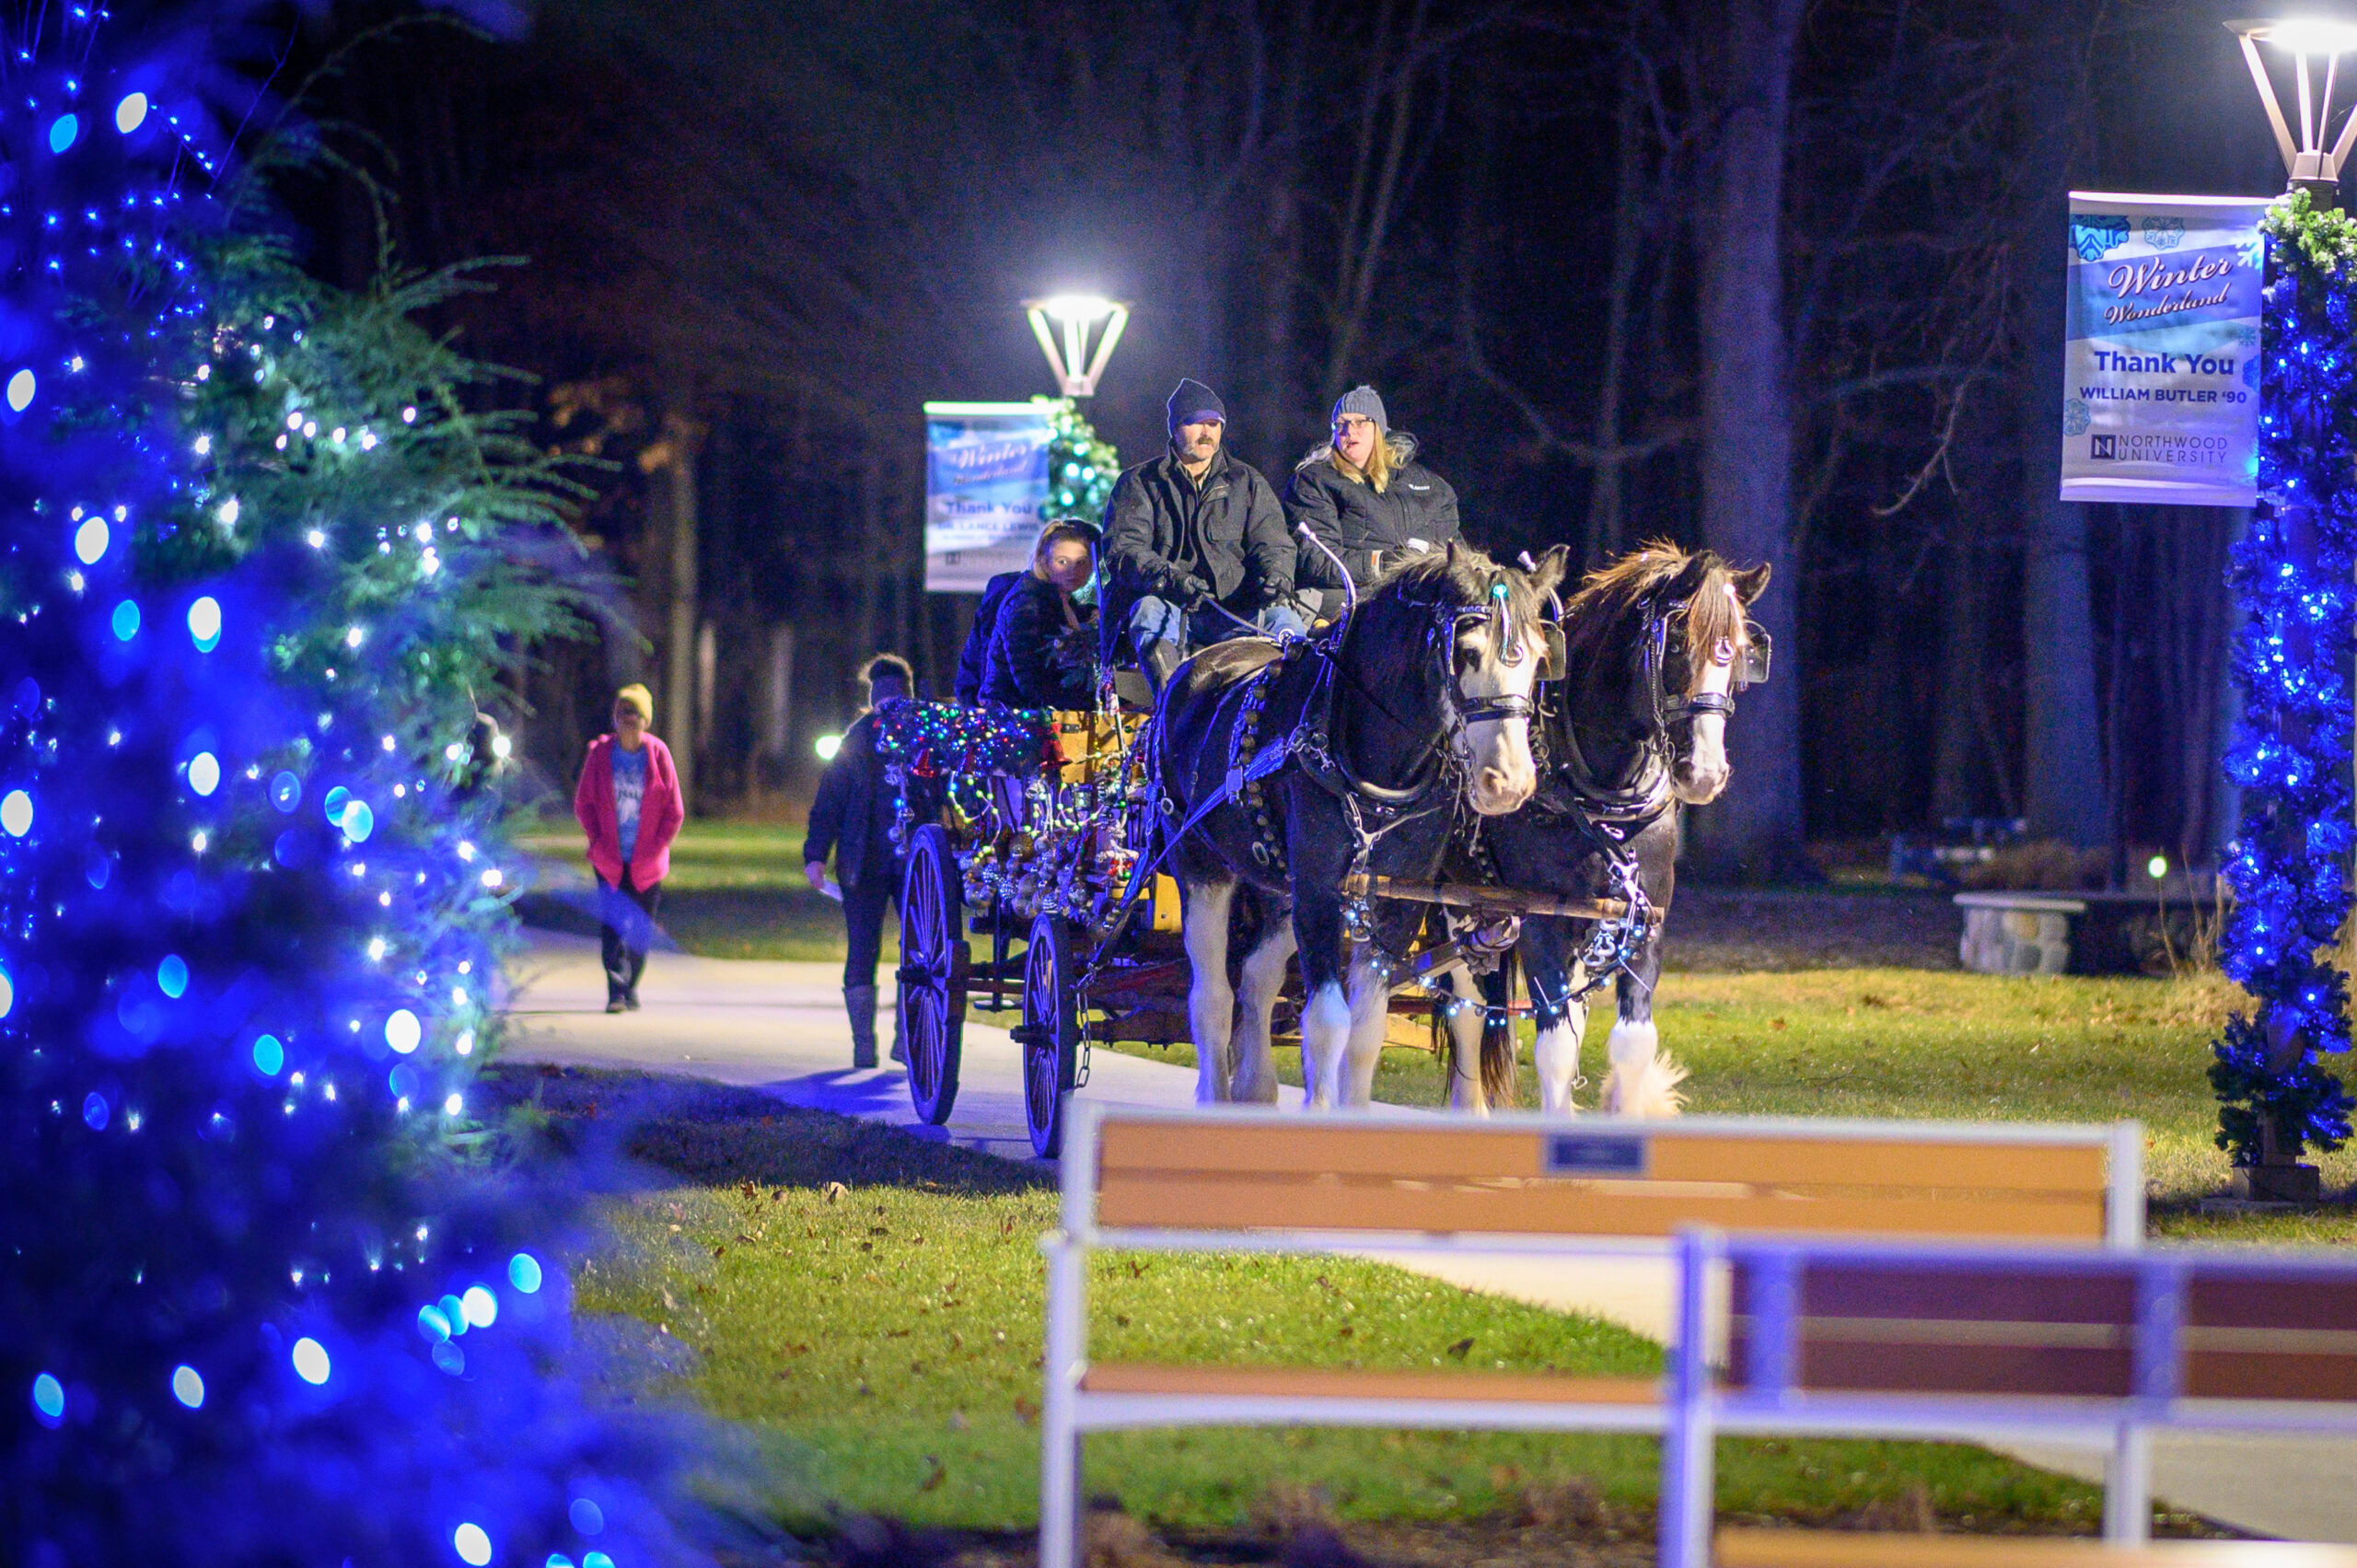 Horse carriage rides through the Mall Walk surrounded by bright blue Christmas trees